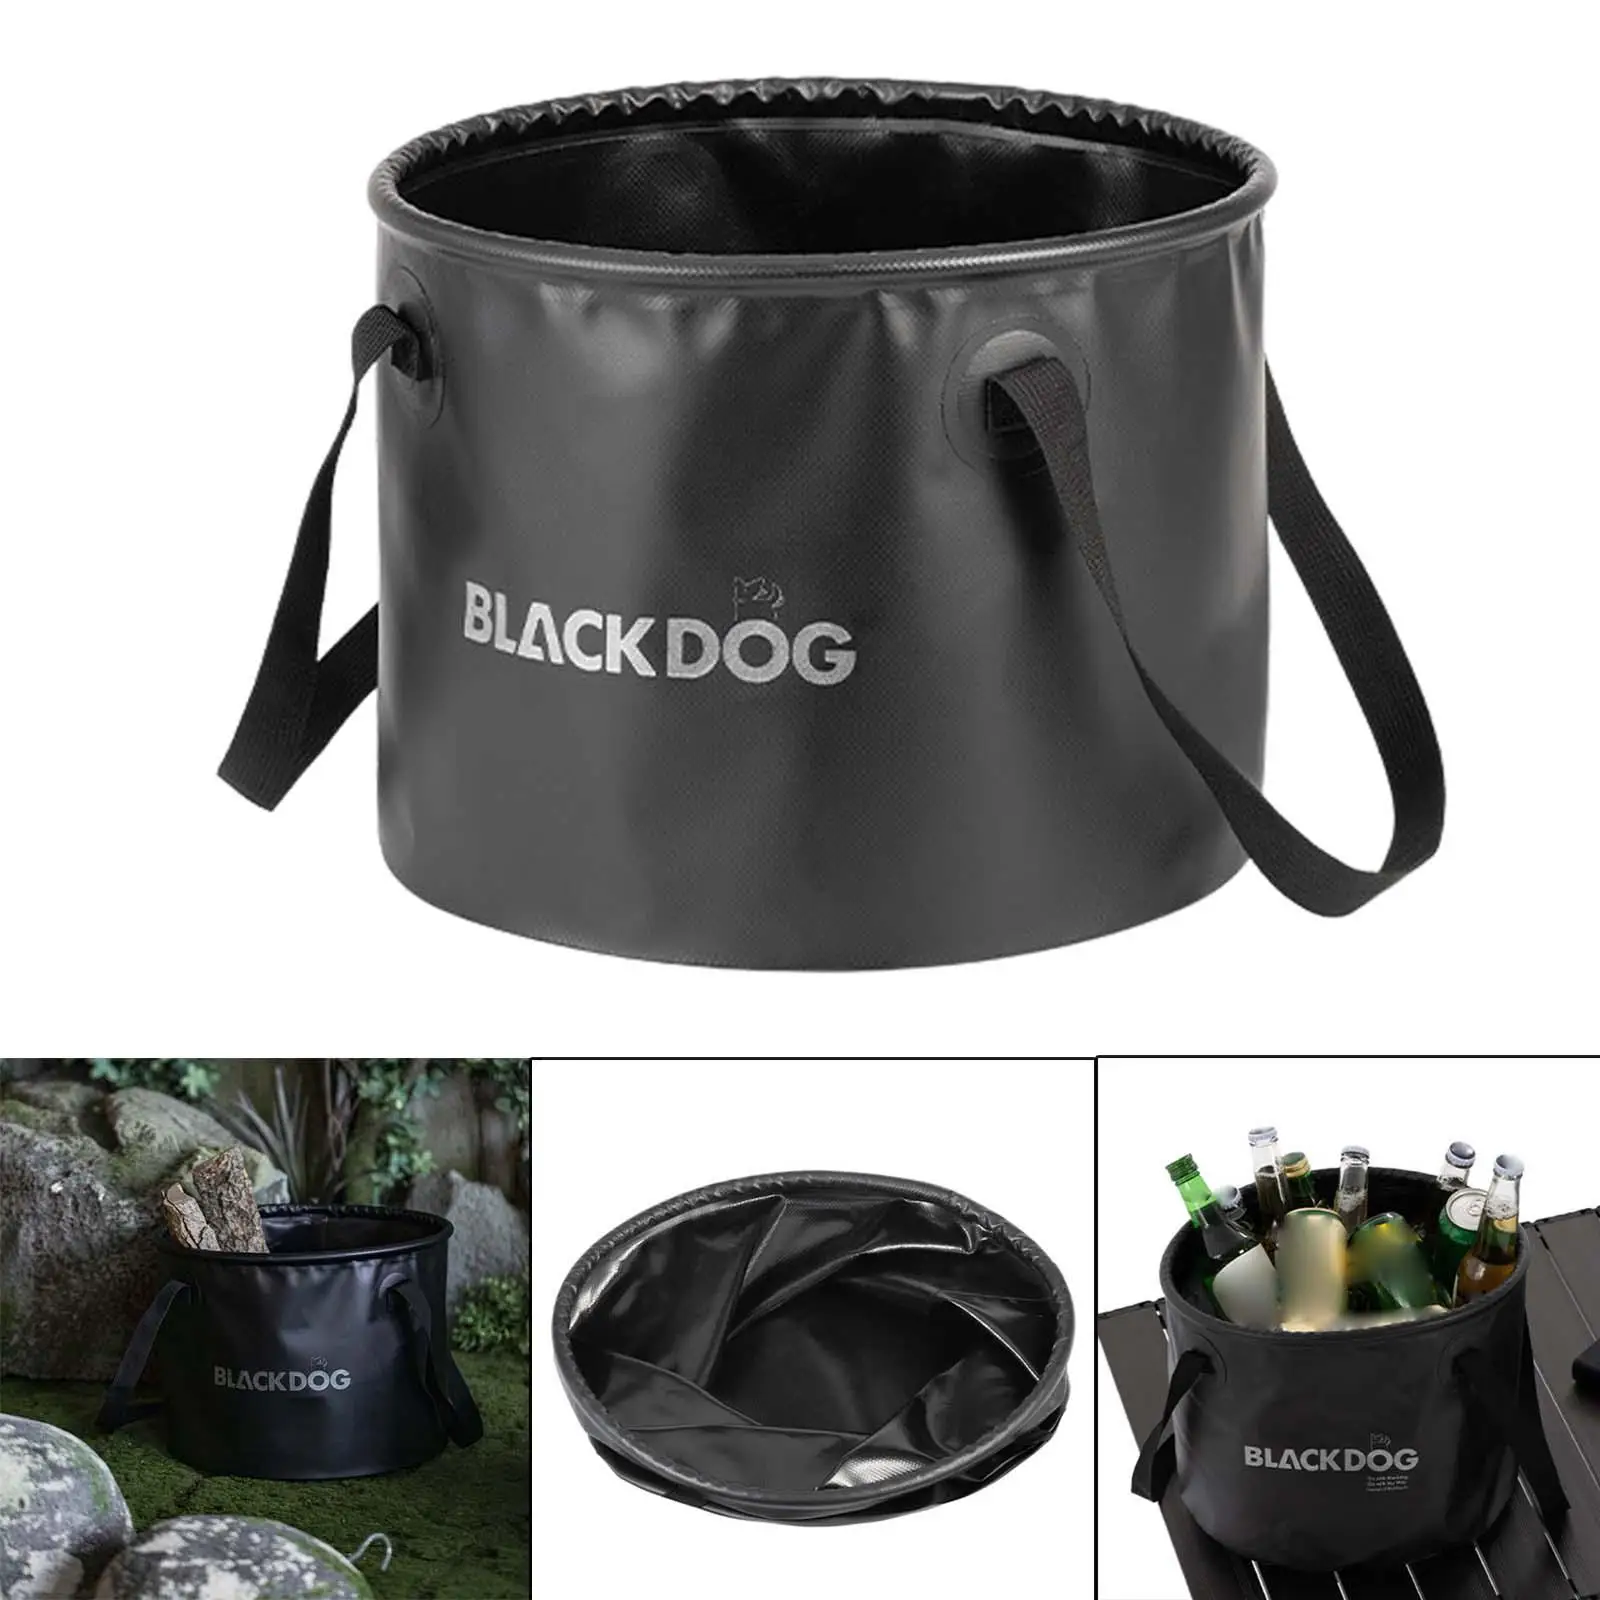 Foldable Round Bucket Portable with Handle 20L Mesh Pocket for Cackpacking